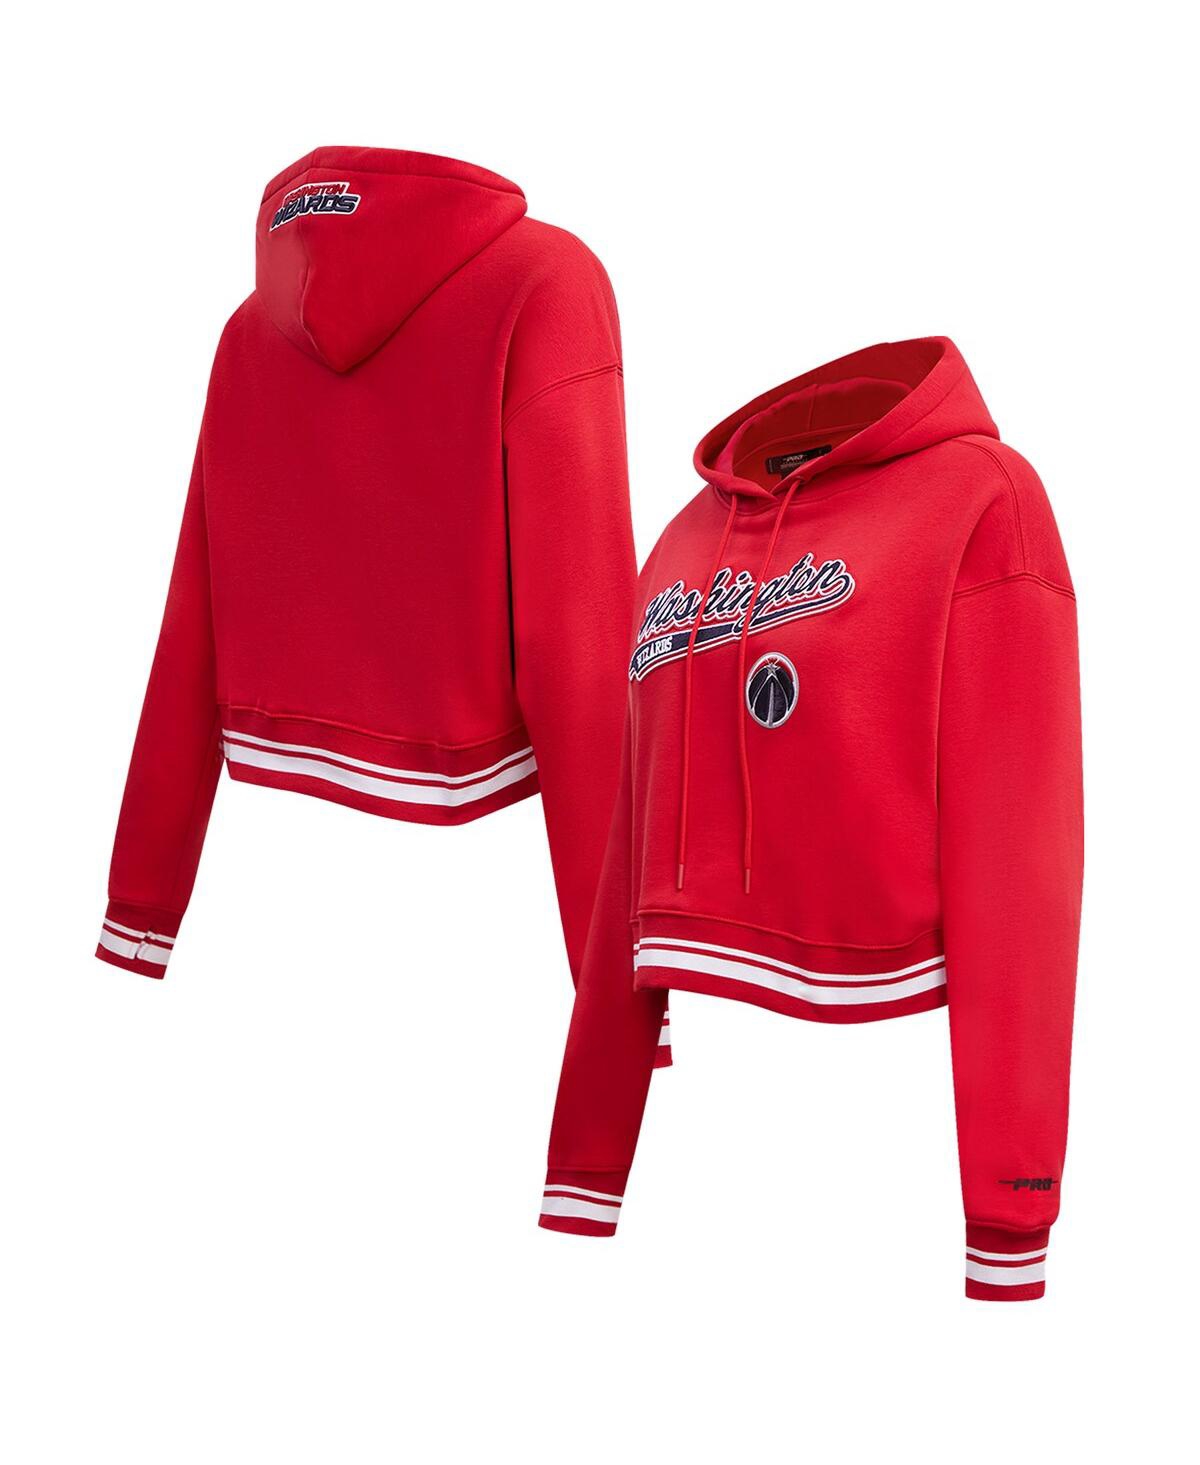 Shop Pro Standard Women's  Red Washington Wizards Script Tail Cropped Pullover Hoodie